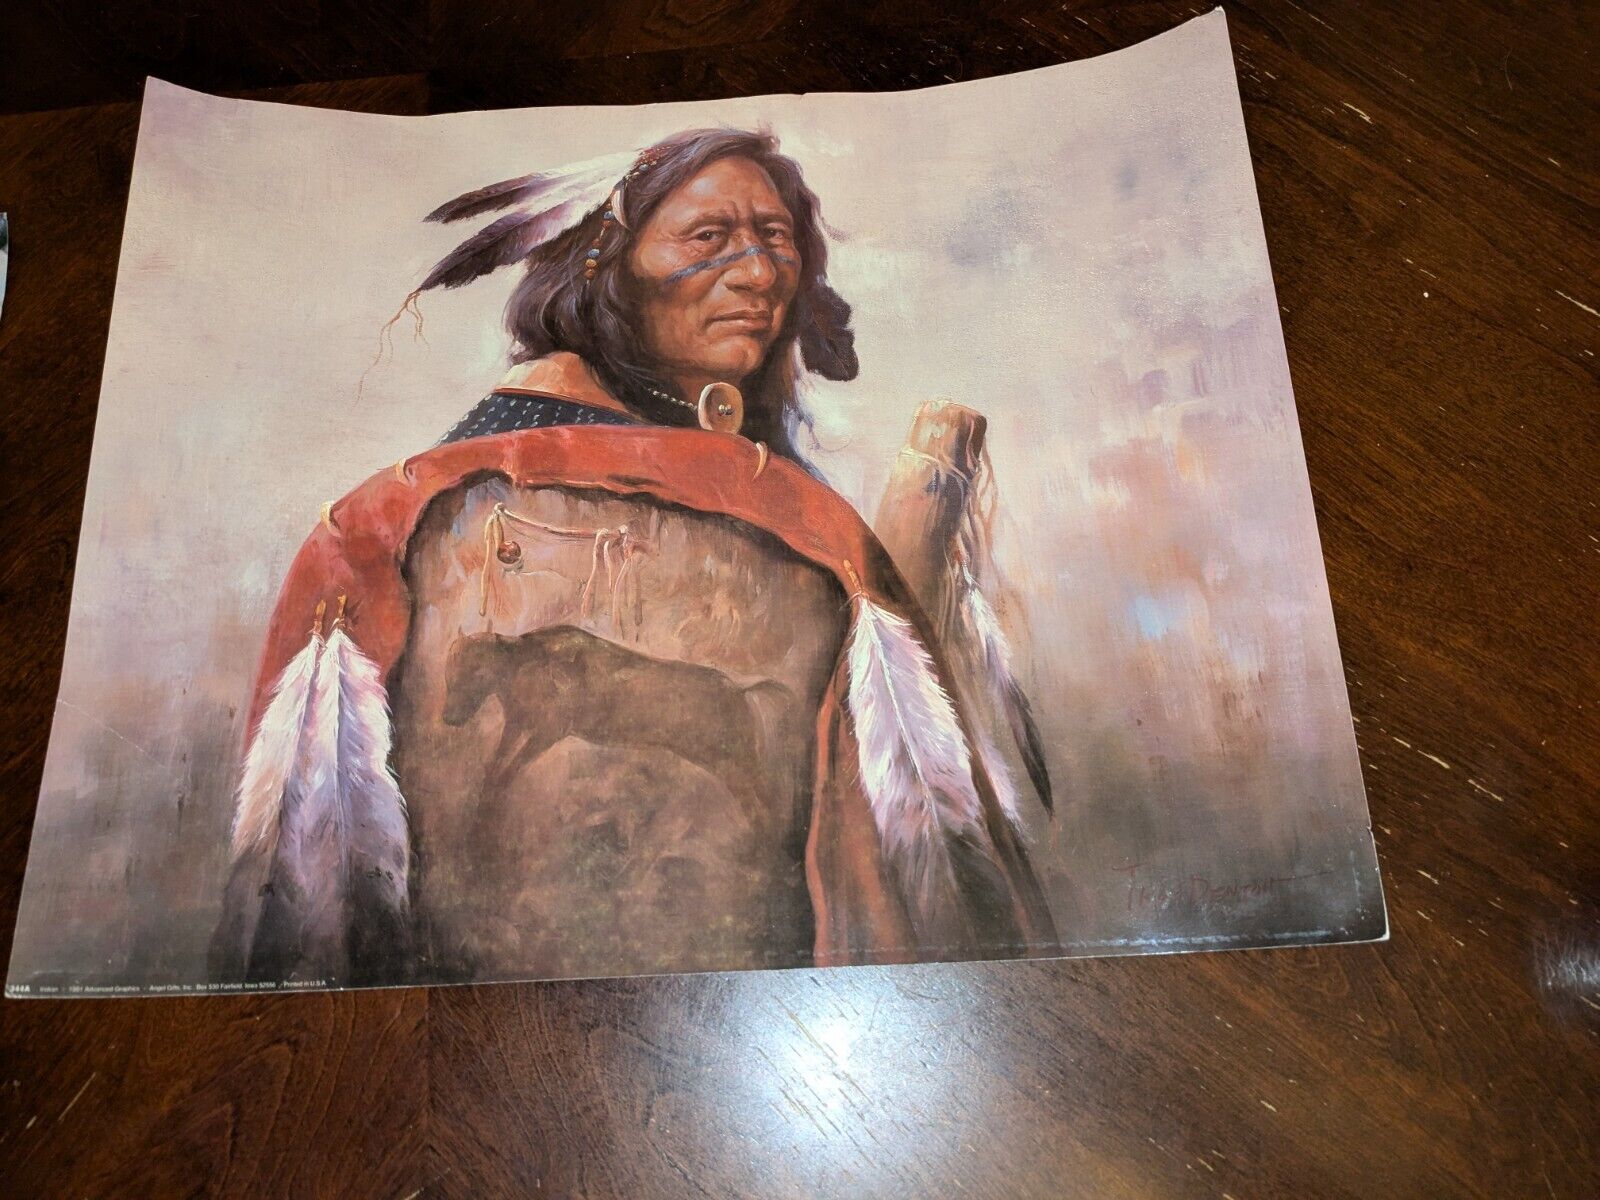 LOT of 2 Prints Troy Denton Native American Chief Indian Educational Decorative